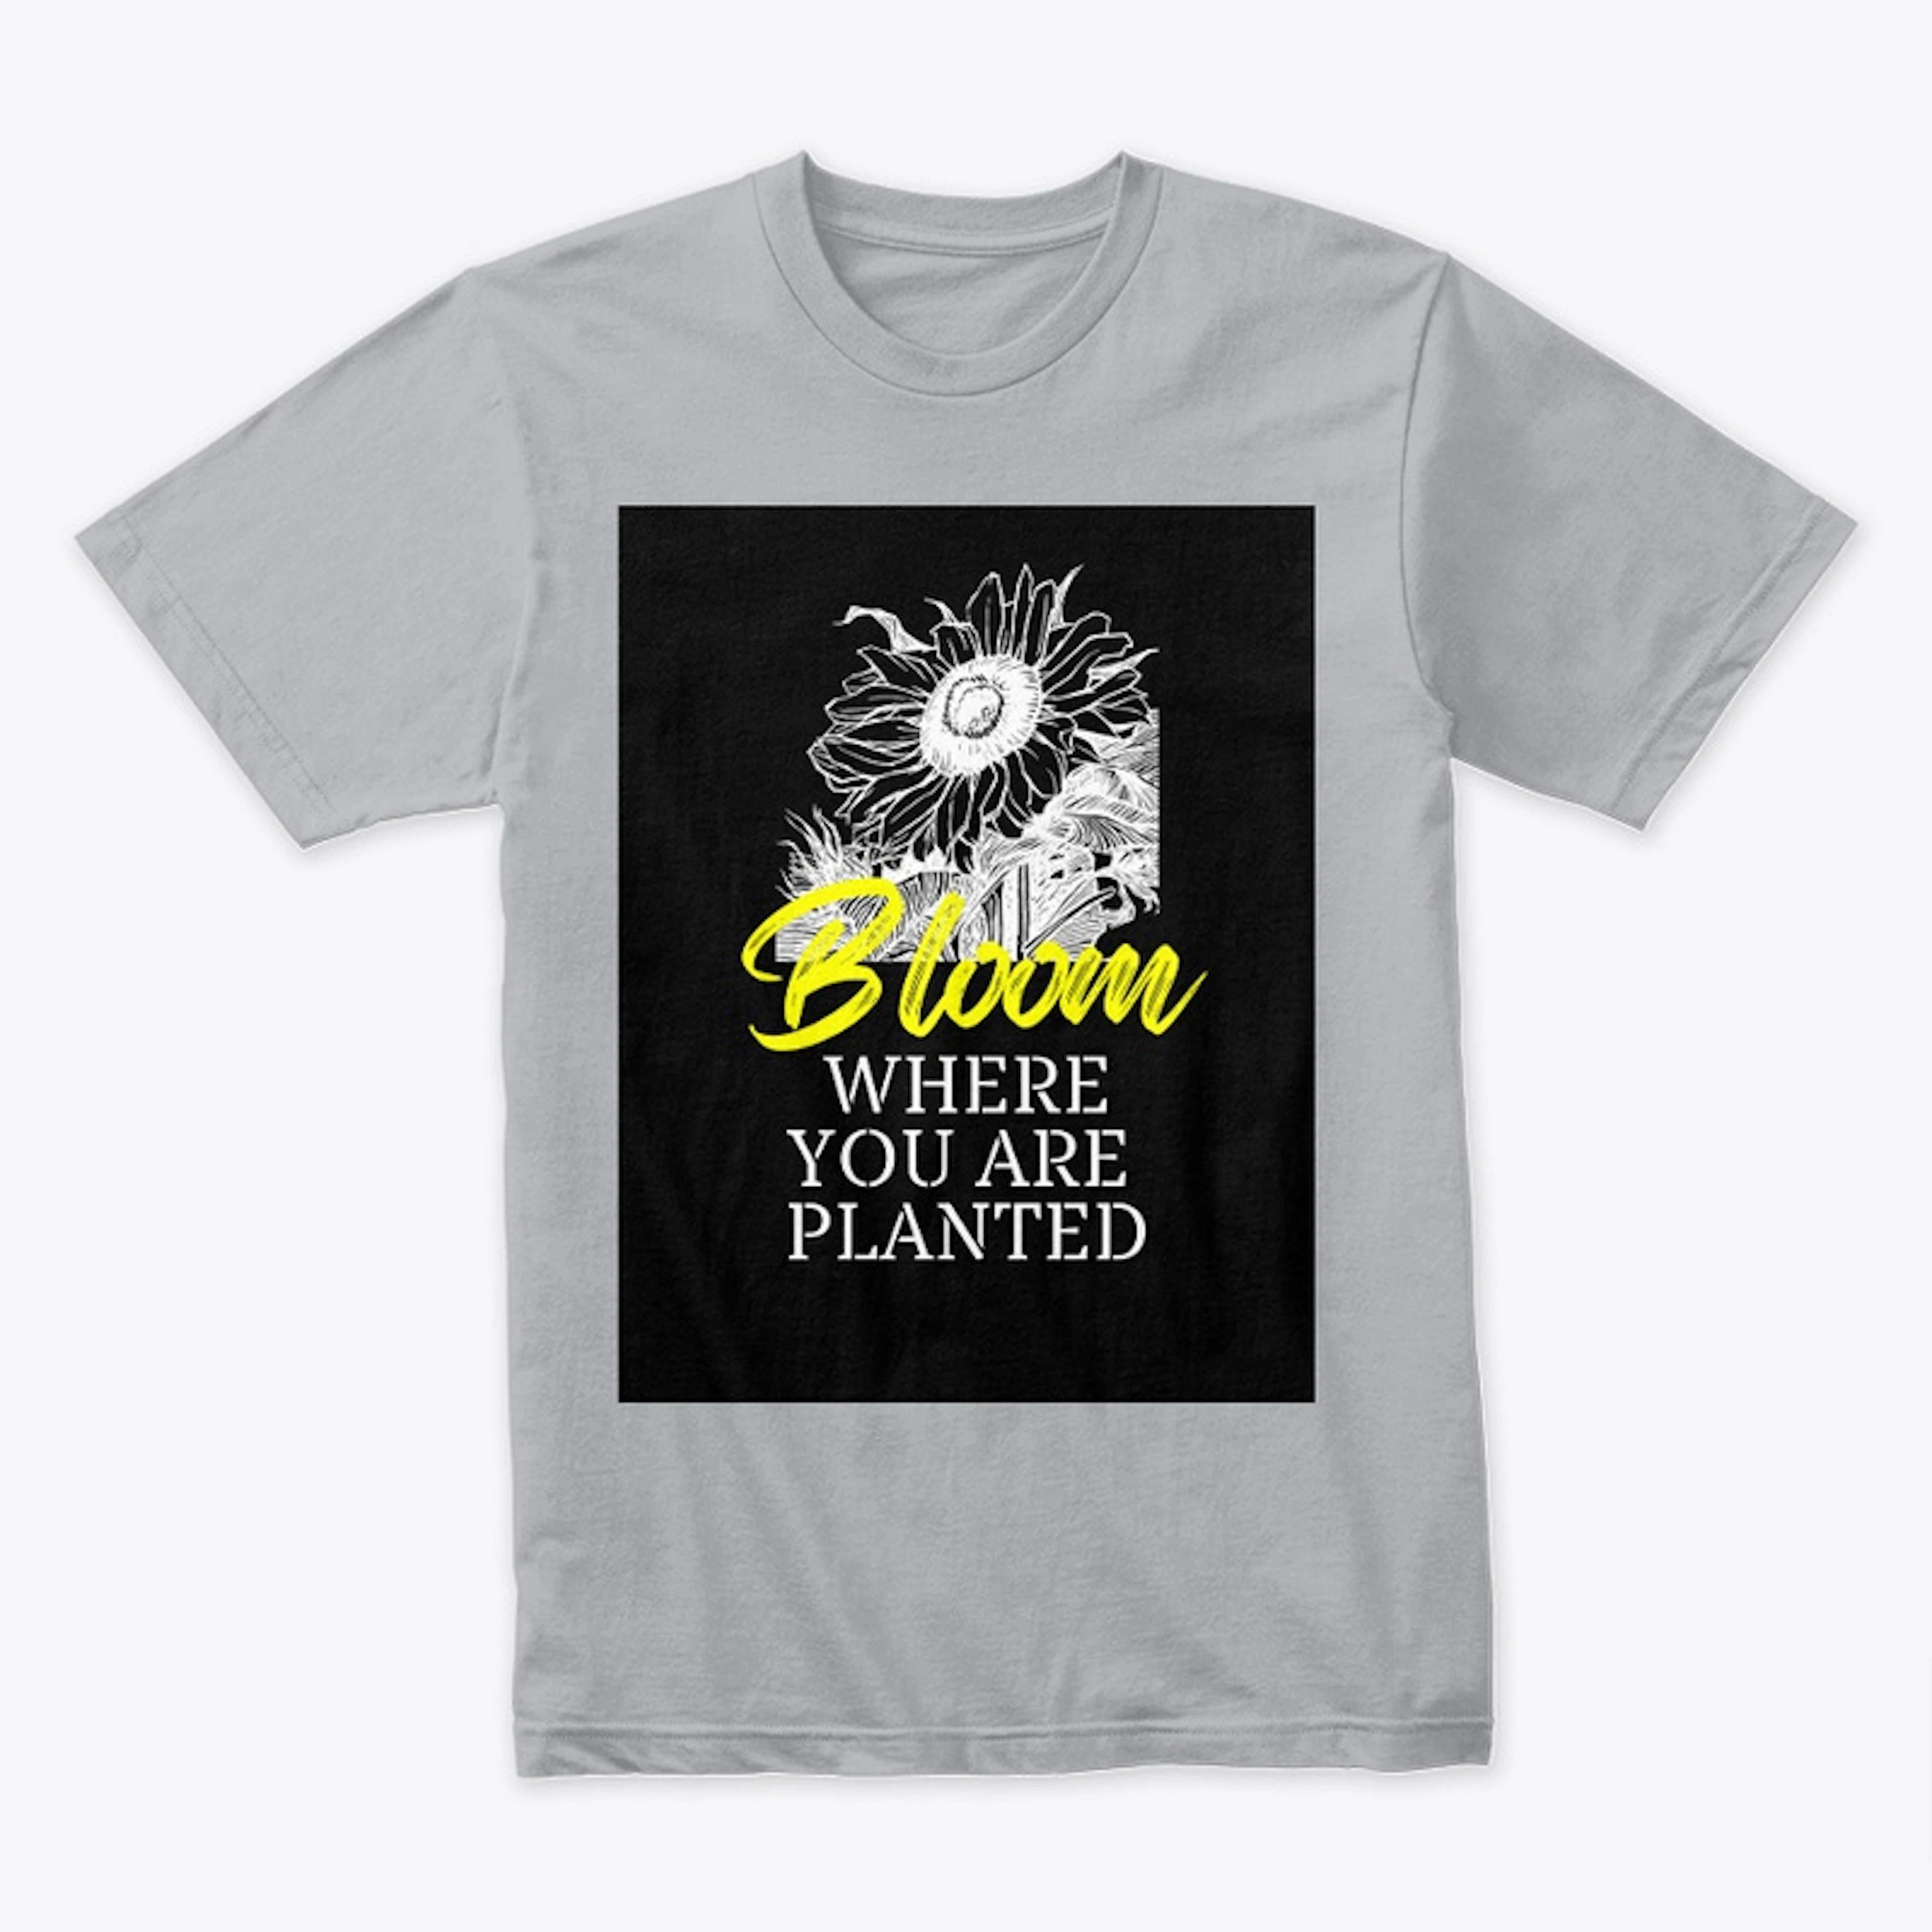 Bloom were not just planted